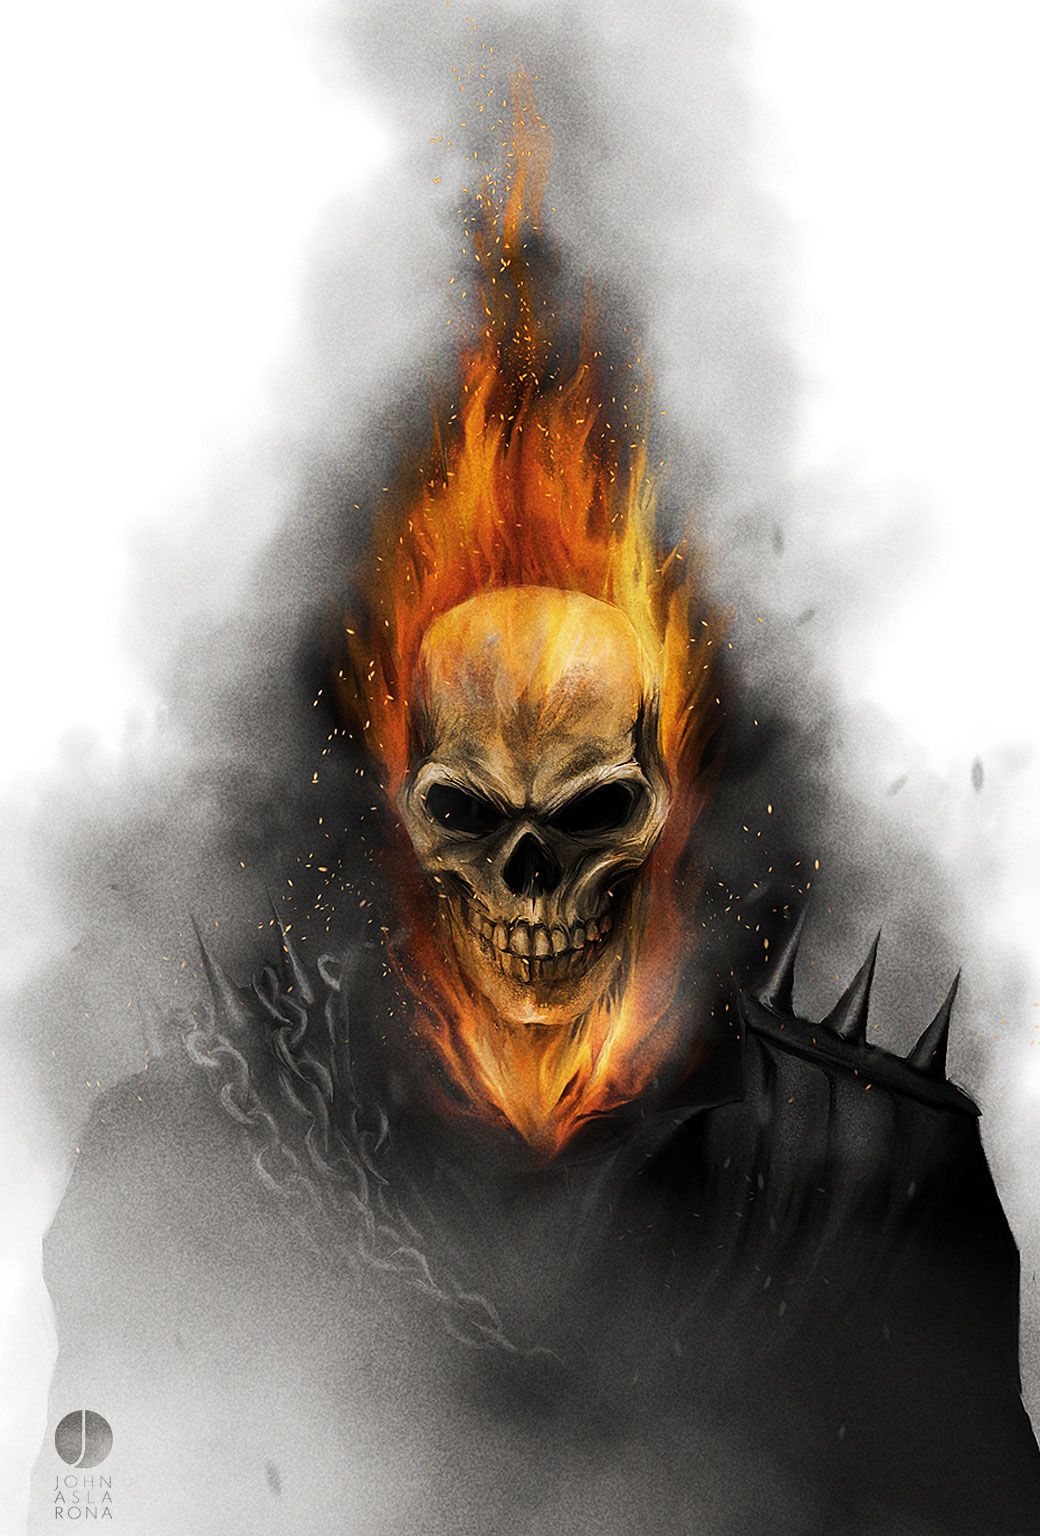 Parallax-Wallpapers.com • Ghost Rider 2 HD Wallpapers